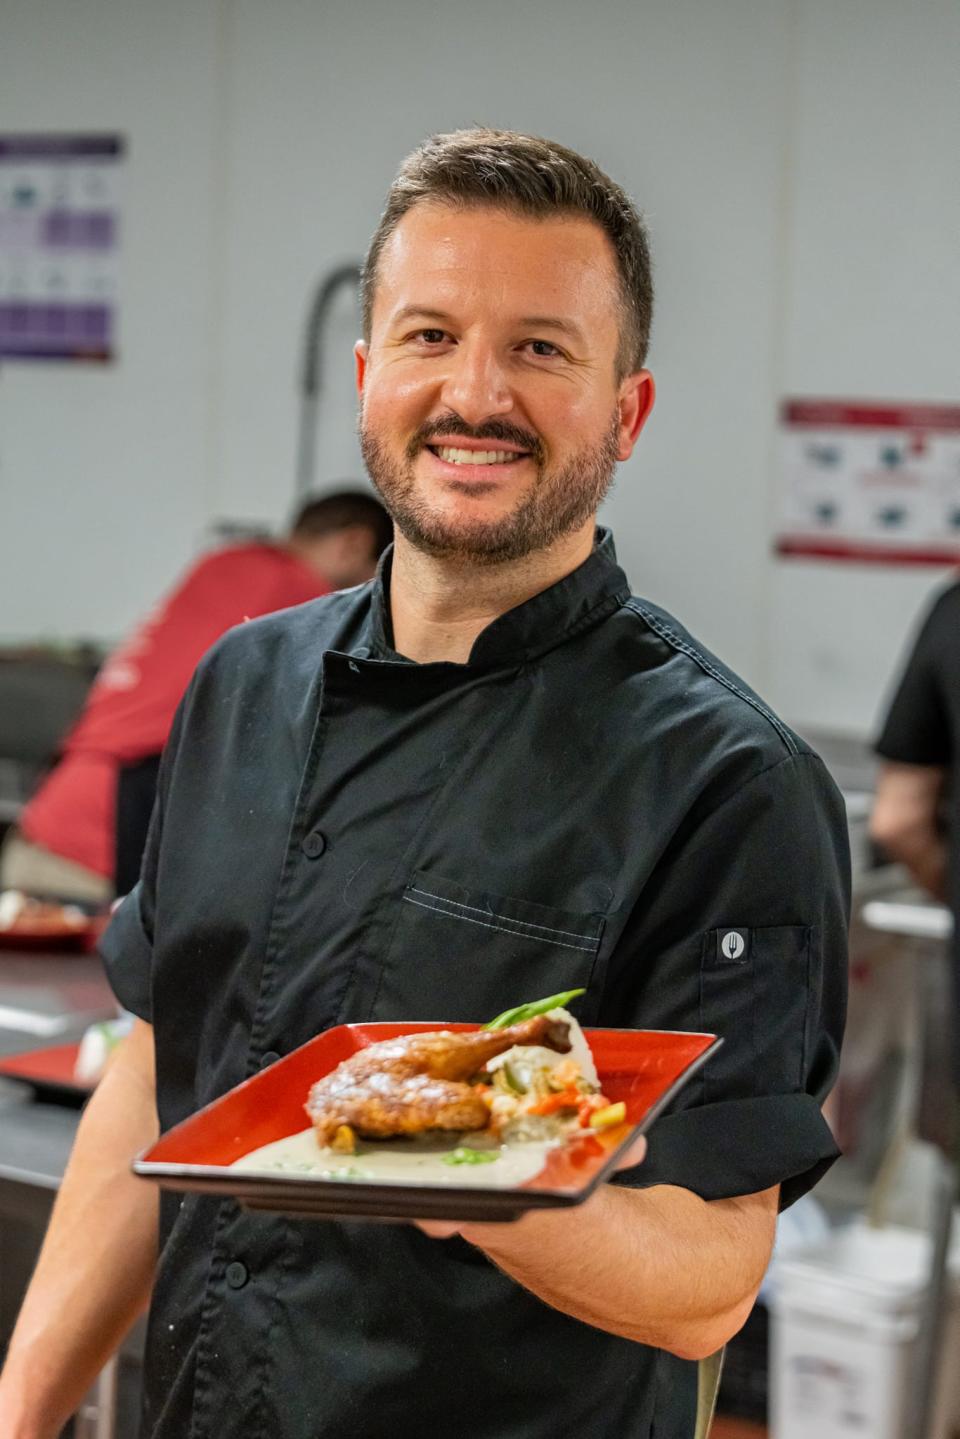 Rich Knowles is the chef and owner of EnRich Bistro, which is expected to open this spring in Bradenton. He's also the owner of the Innovative Dining catering company and co-owner of the Bradentrucky Grub Truck.